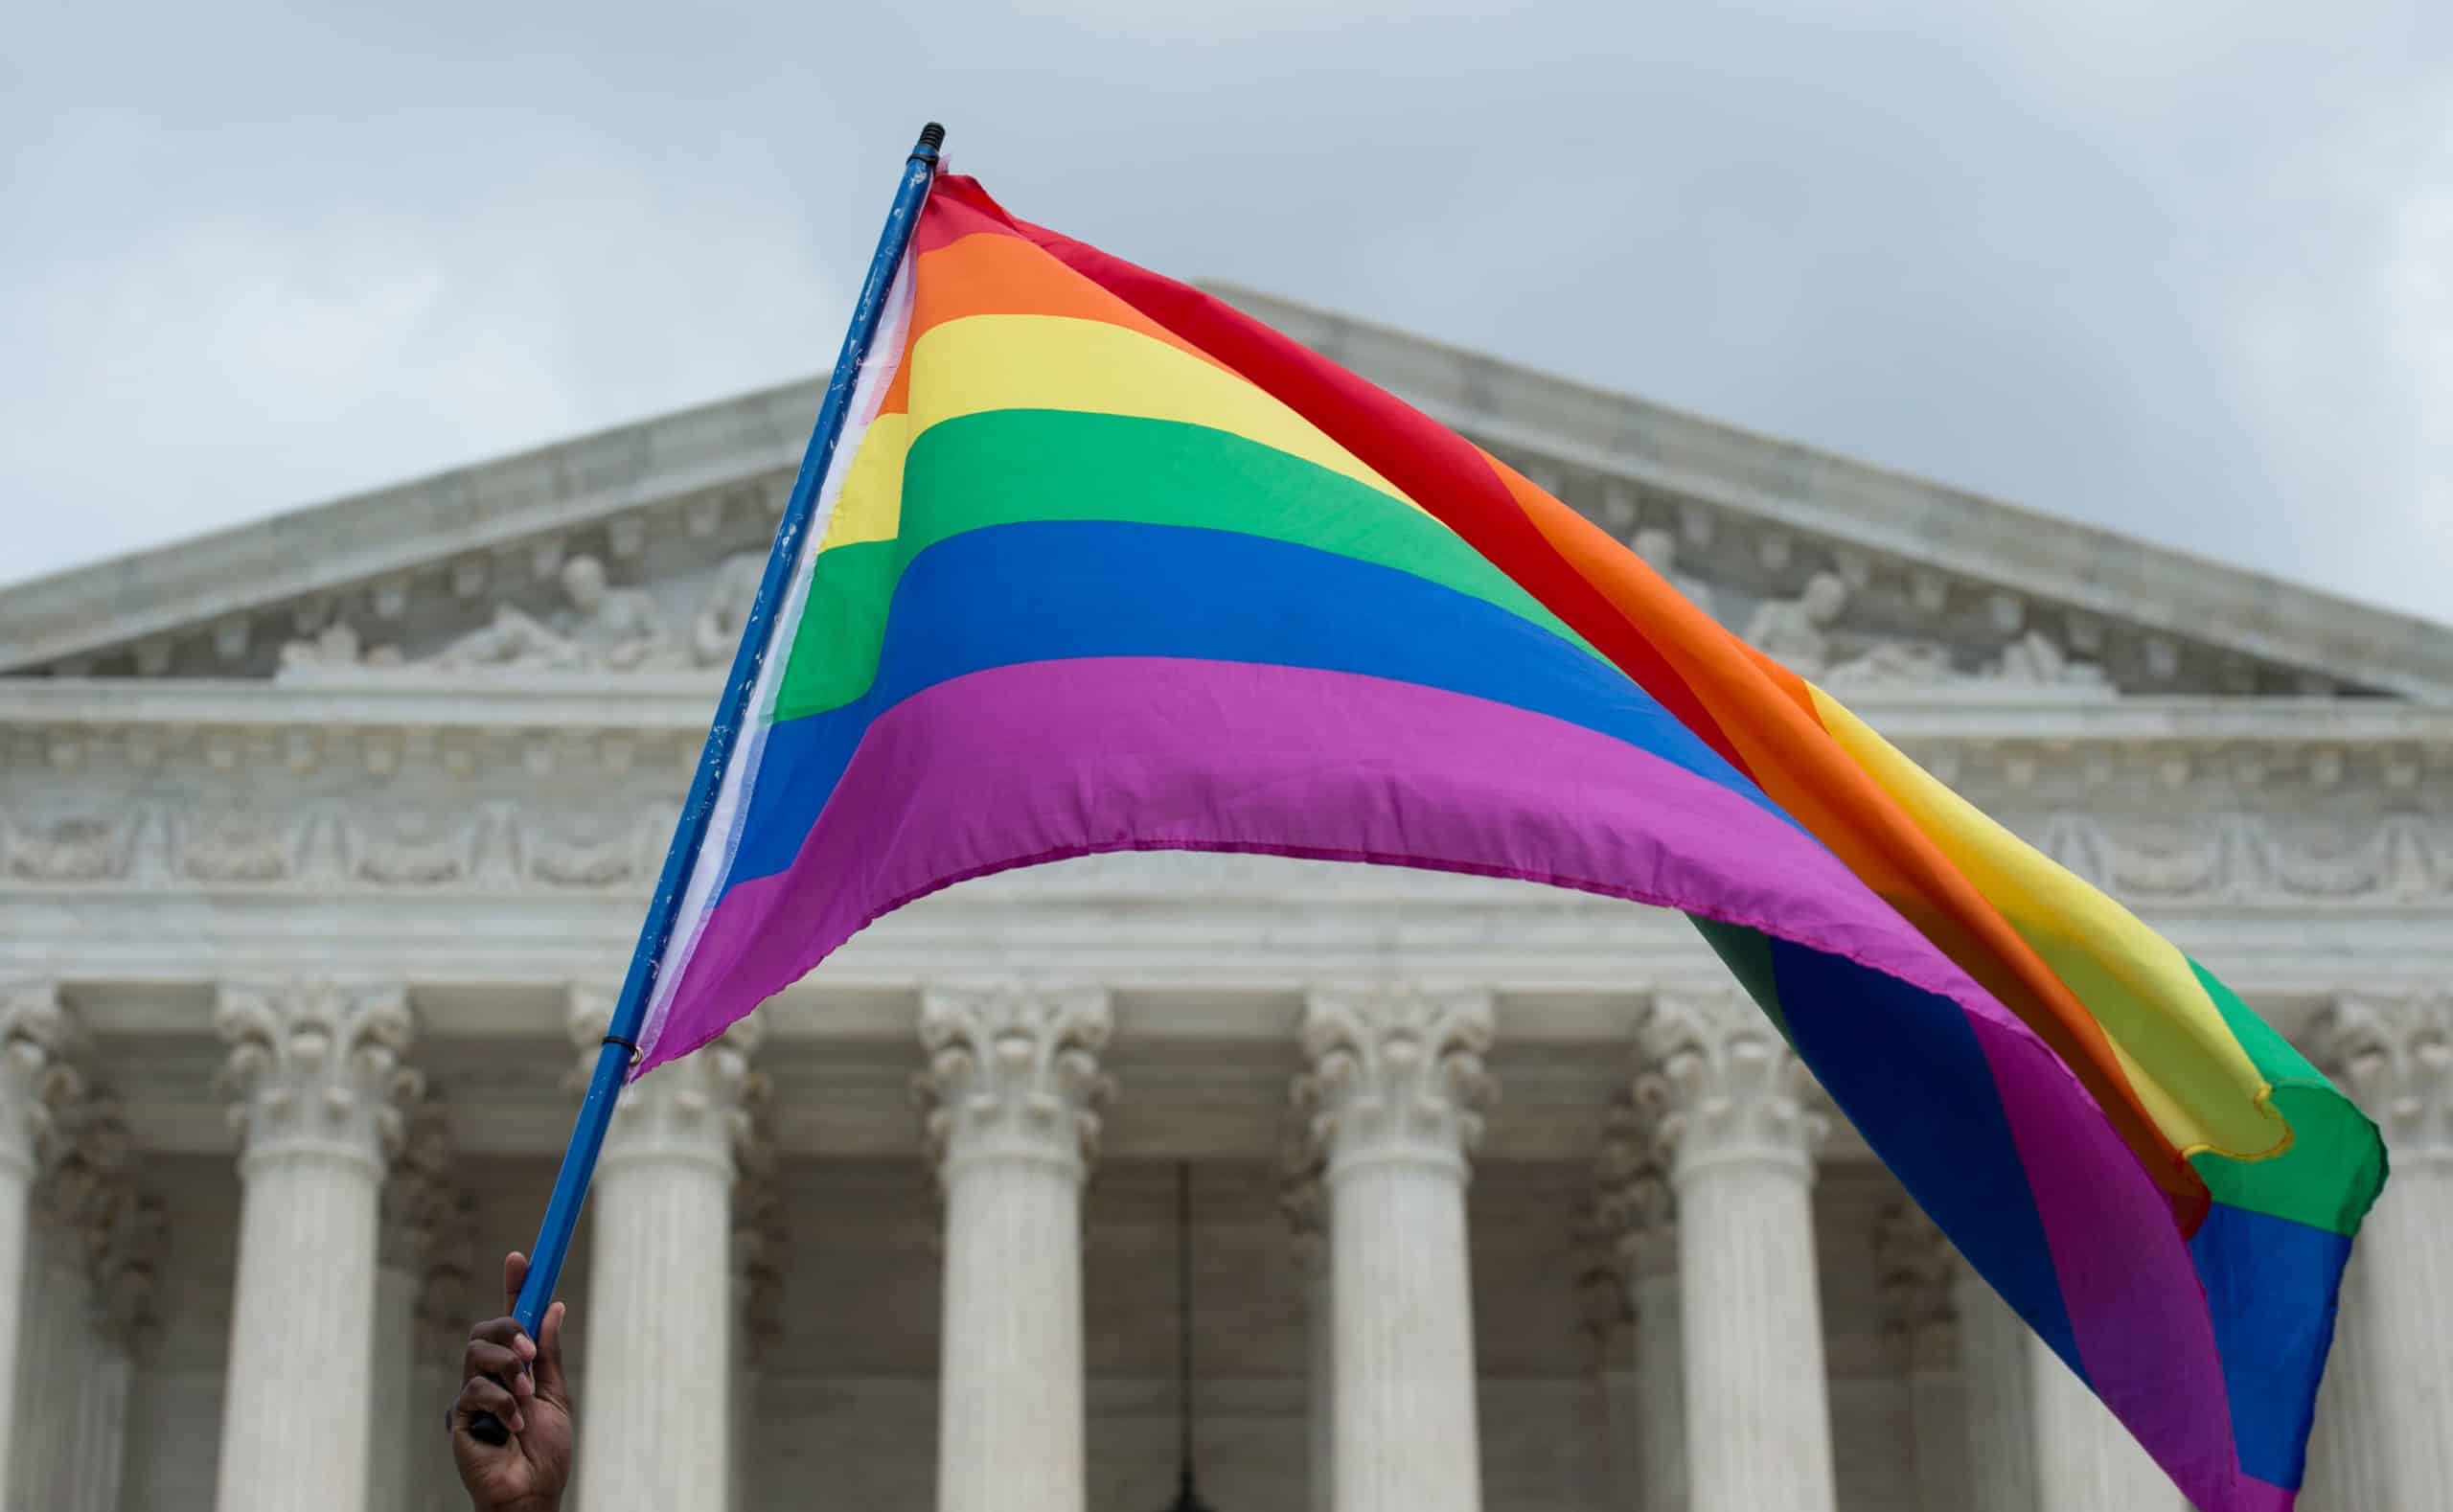 A rainbow flag is flown outside the Supreme Court in Washington, DC on June 26, 2015 after its historic decision on gay marriage. The US Supreme Court ruled that gay marriage is a nationwide right, a landmark decision in one of the most keenly awaited announcements in decades and sparking scenes of jubilation. The nation's highest court, in a narrow 5-4 decision, said the US Constitution requires all states to carry out and recognize marriage between people of the same sex. AFP PHOTO/ MOLLY RILEY (Photo by MOLLY RILEY / AFP)        (Photo credit should read MOLLY RILEY/AFP/Getty Images)